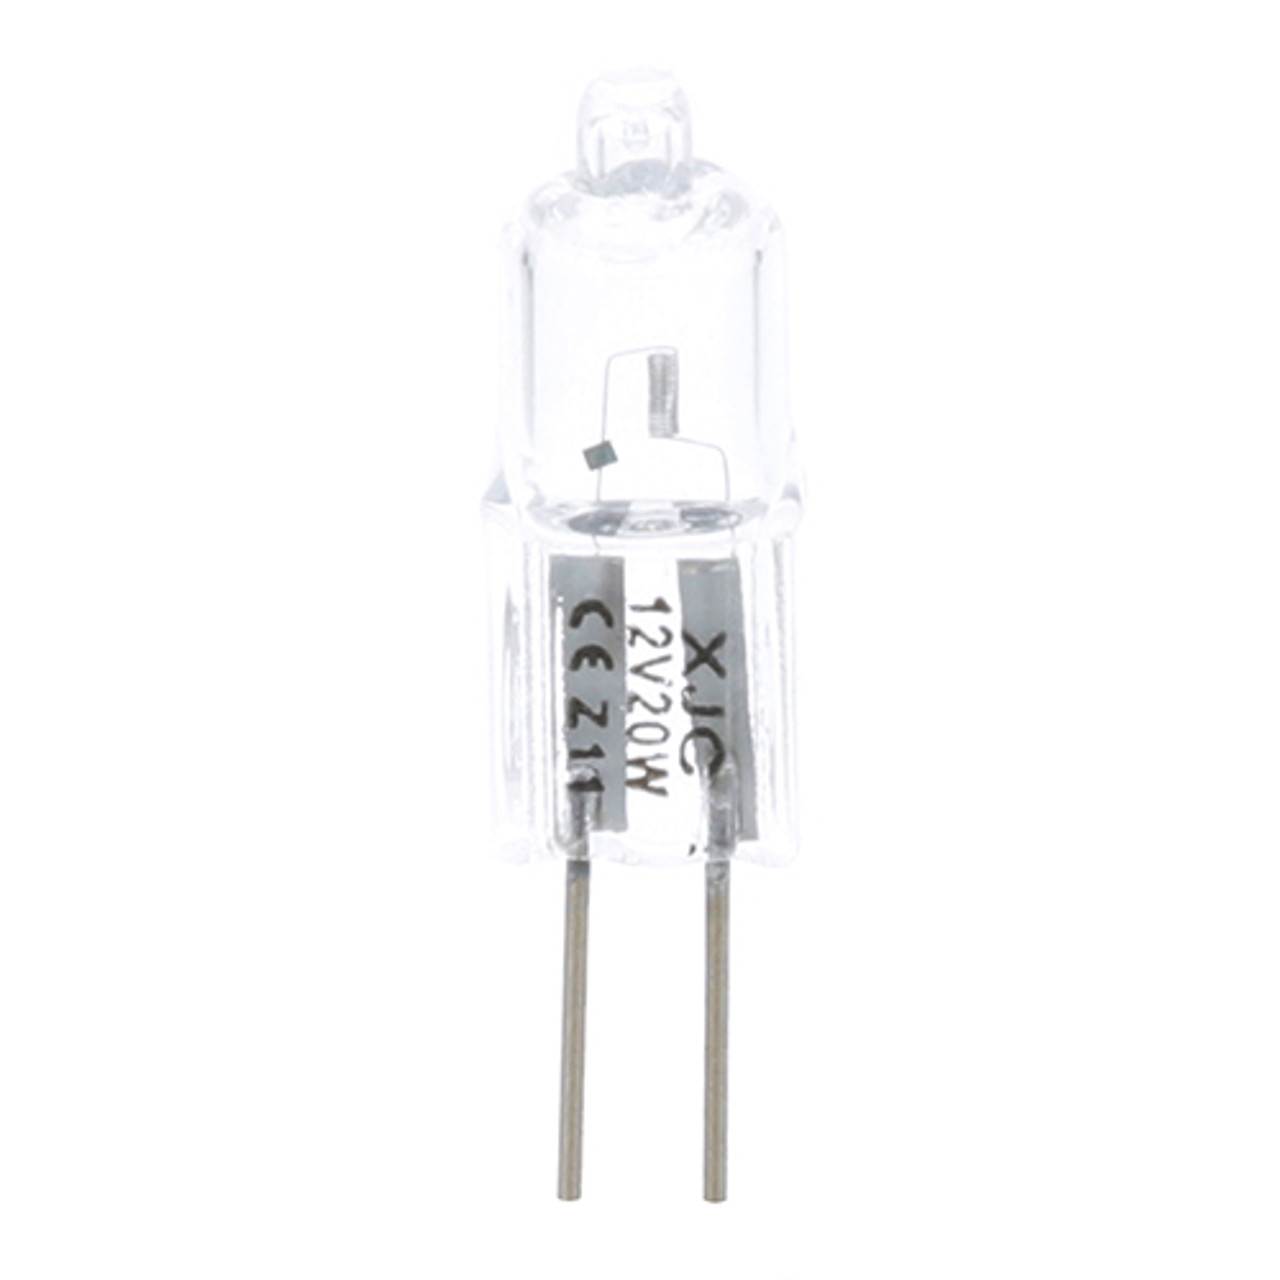 Bulb, 20W 12V , G4 Xenon - Replacement Part For Nu-Vu 50-1568